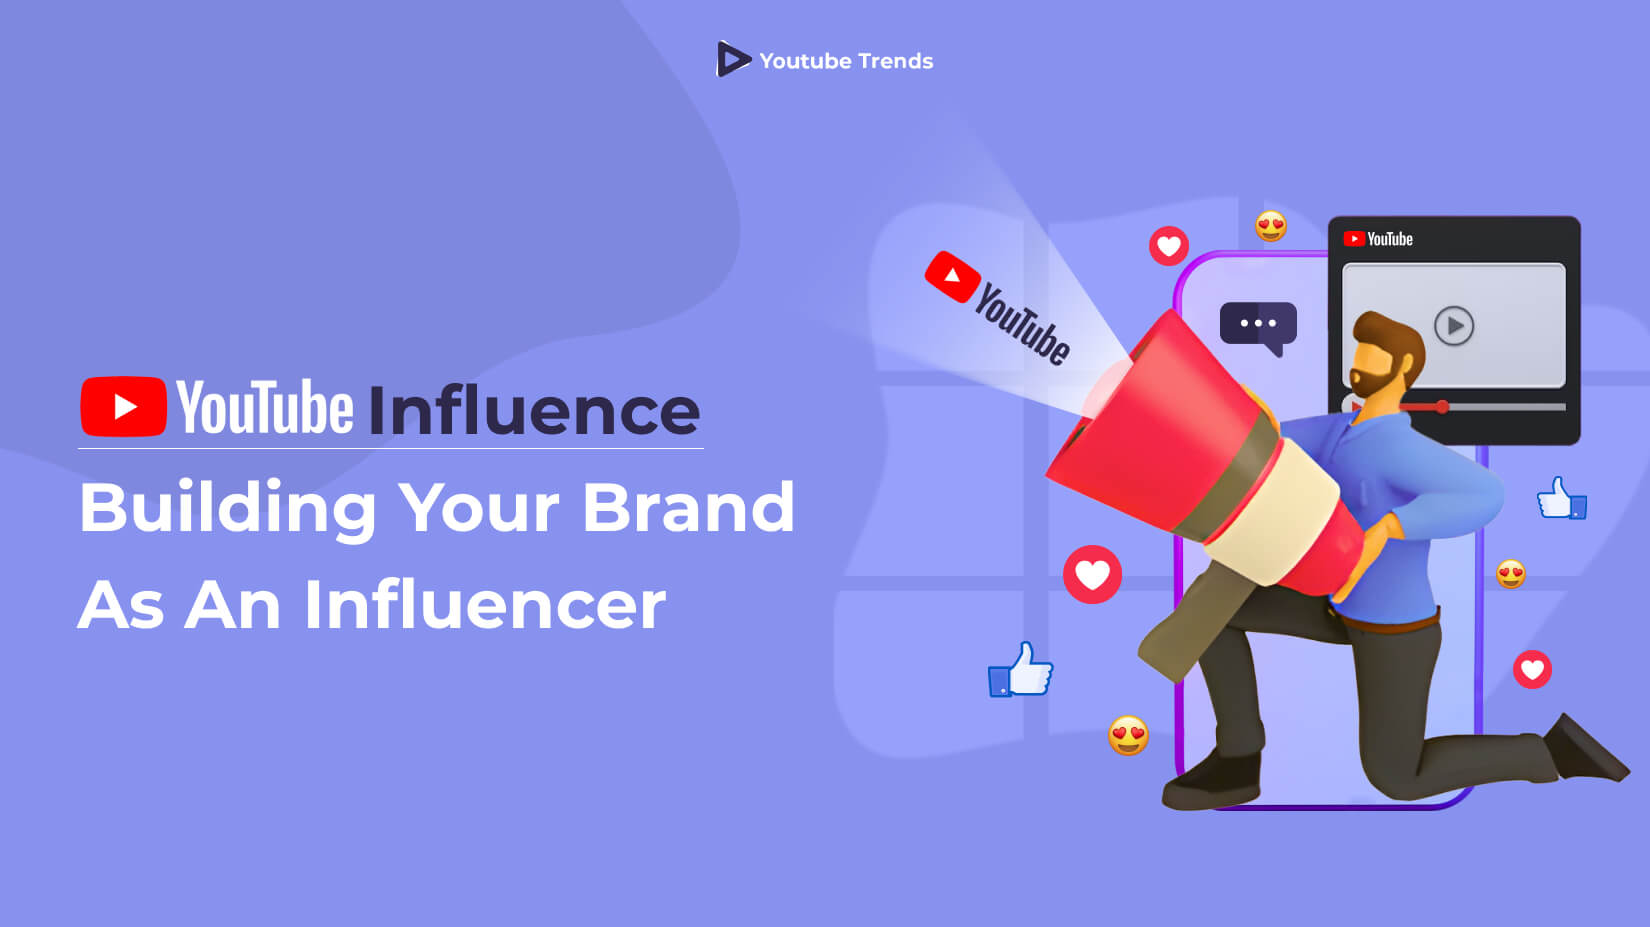 YouTube Influence: Building Your Brand as an Influencer